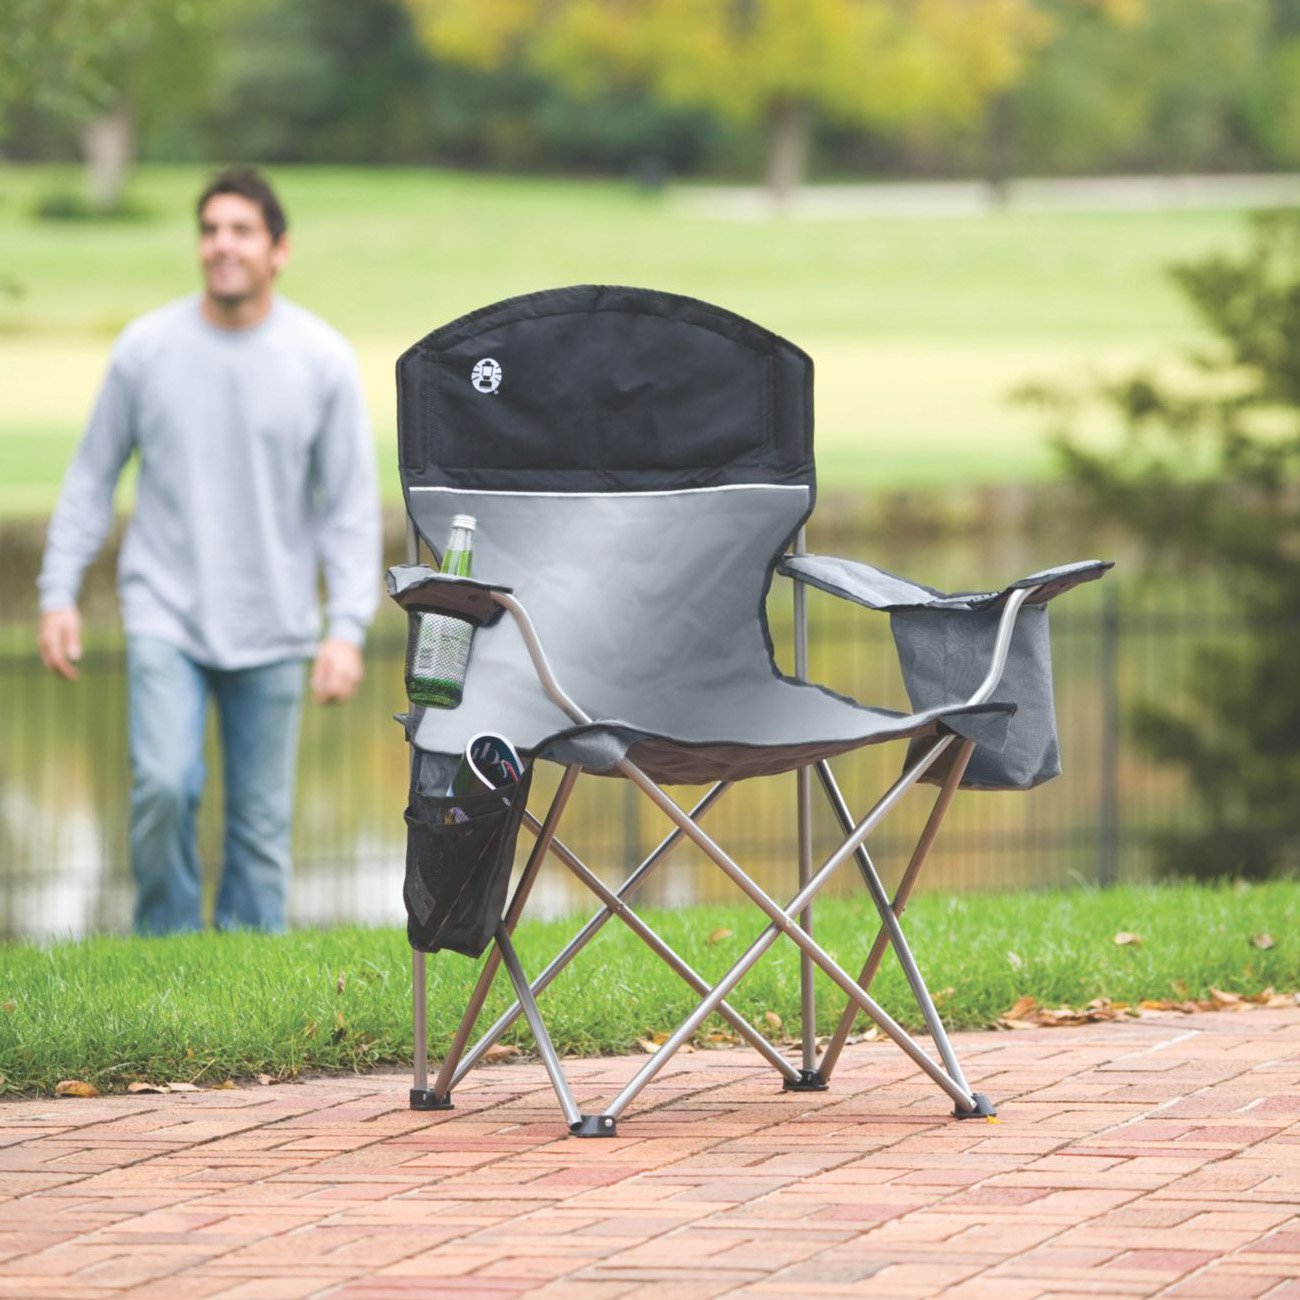 Coleman Oversized Quad Chair with Cooler and Cup Holder, Black/Gray | 2000020256 - image 2 of 7